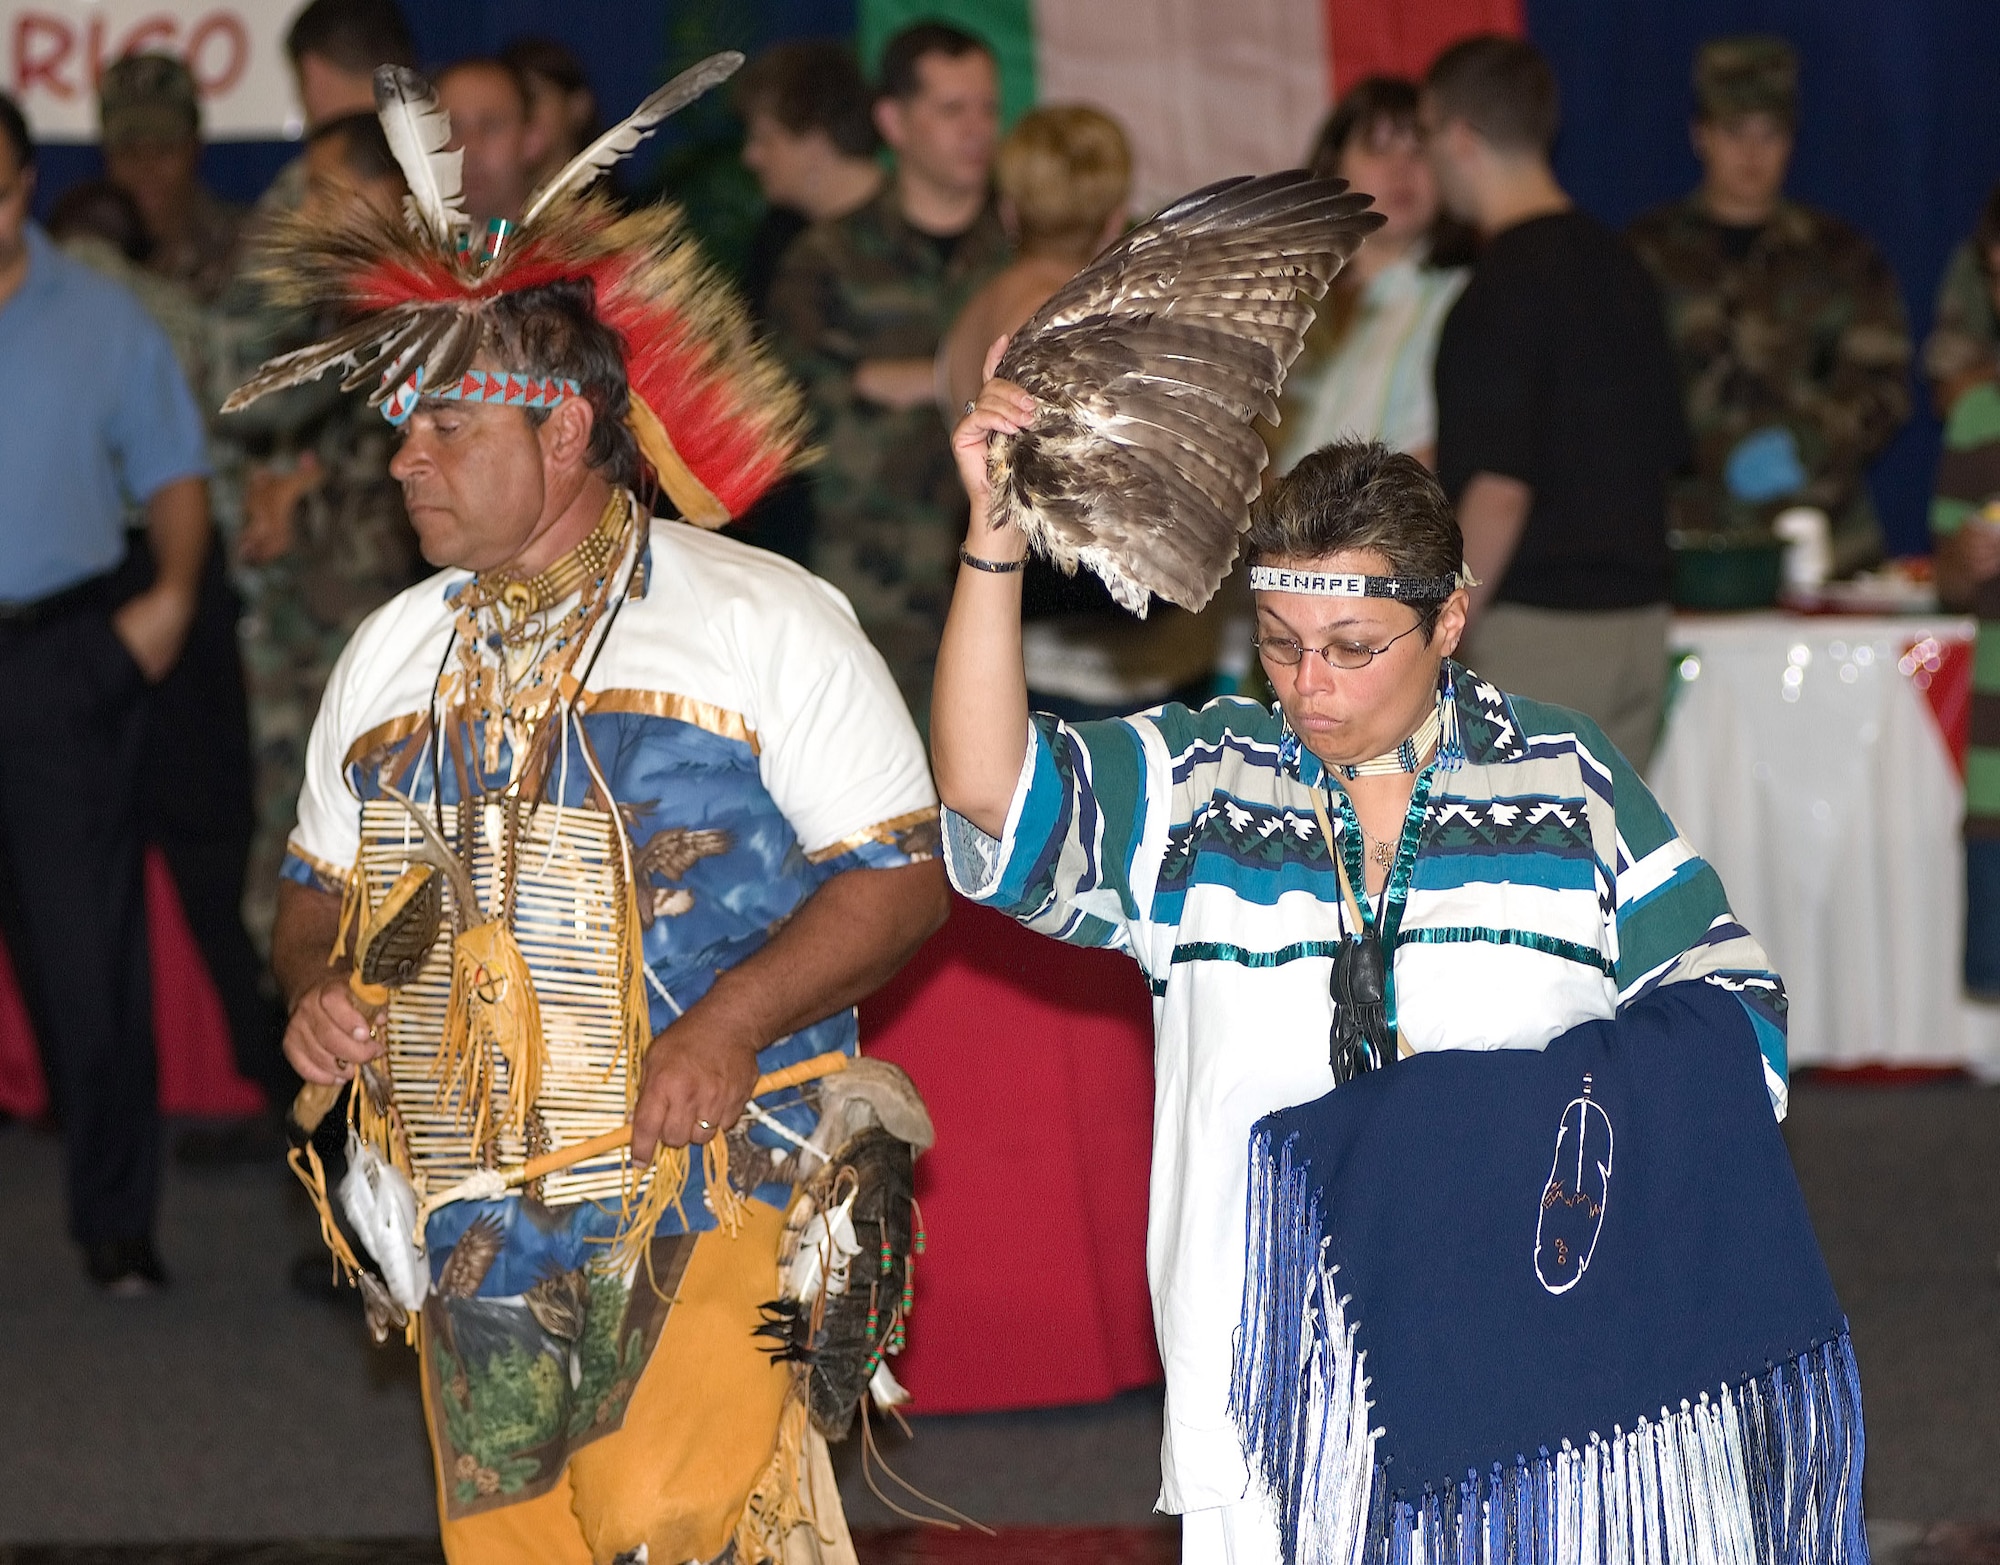 Bob "Little Eagle" Smith and Yvonne "Bright Sparrow" Gourley perform a Native American dance at the Multi-Cultural Expo at The Landings Club June 23. (U.S. Air Force photo by Jason Minto)

